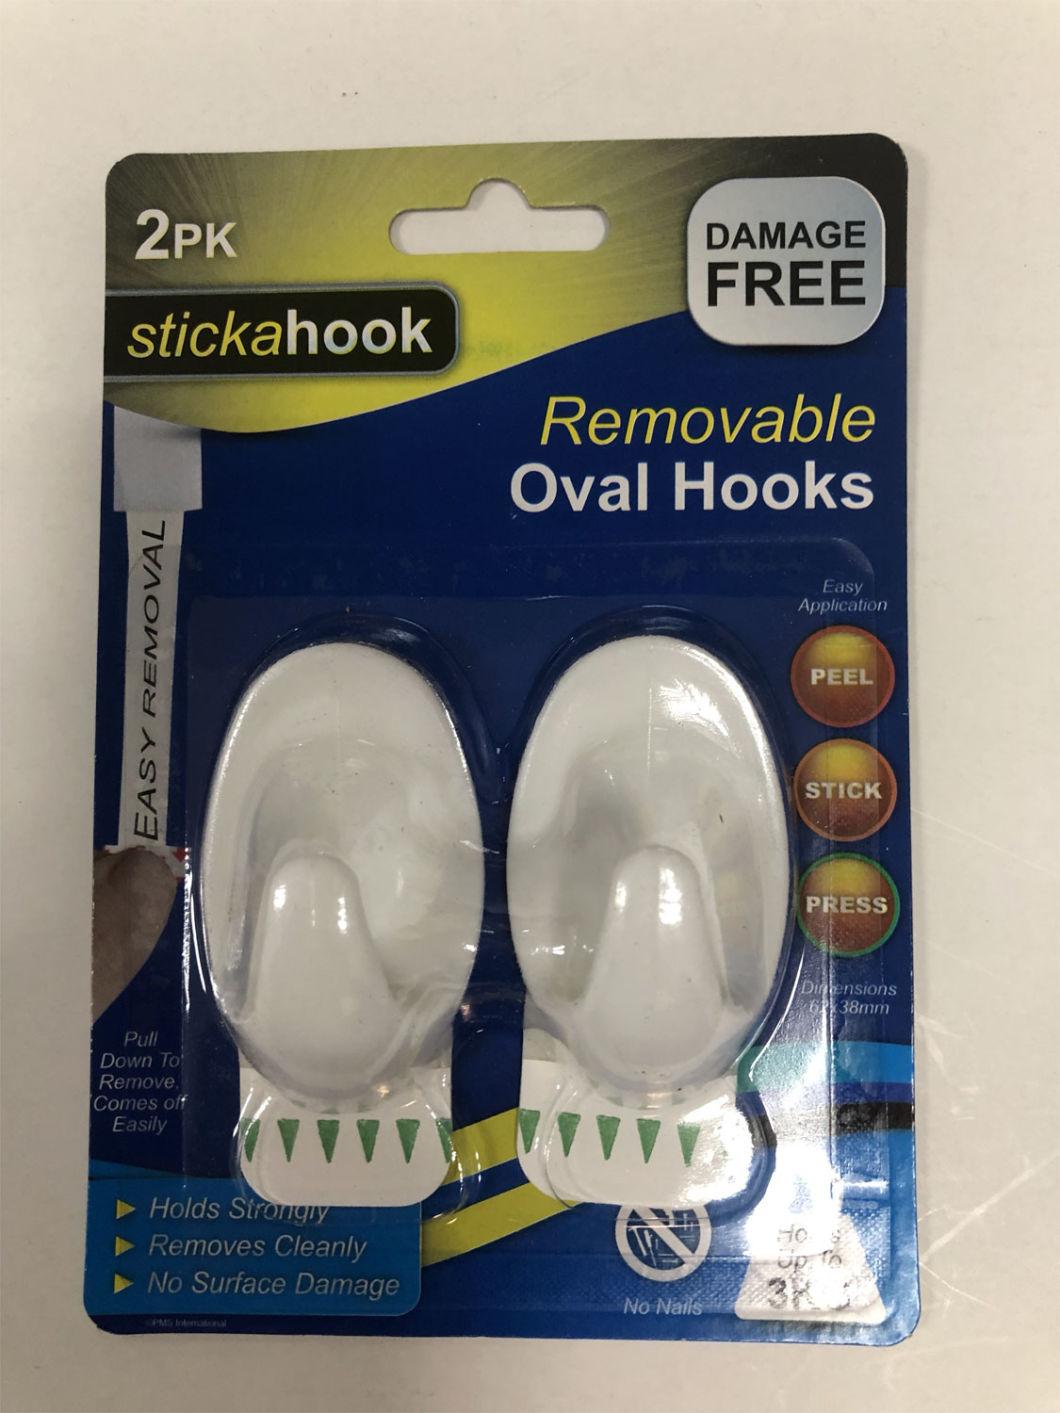 Porttable Small Oval Hook for Household Use